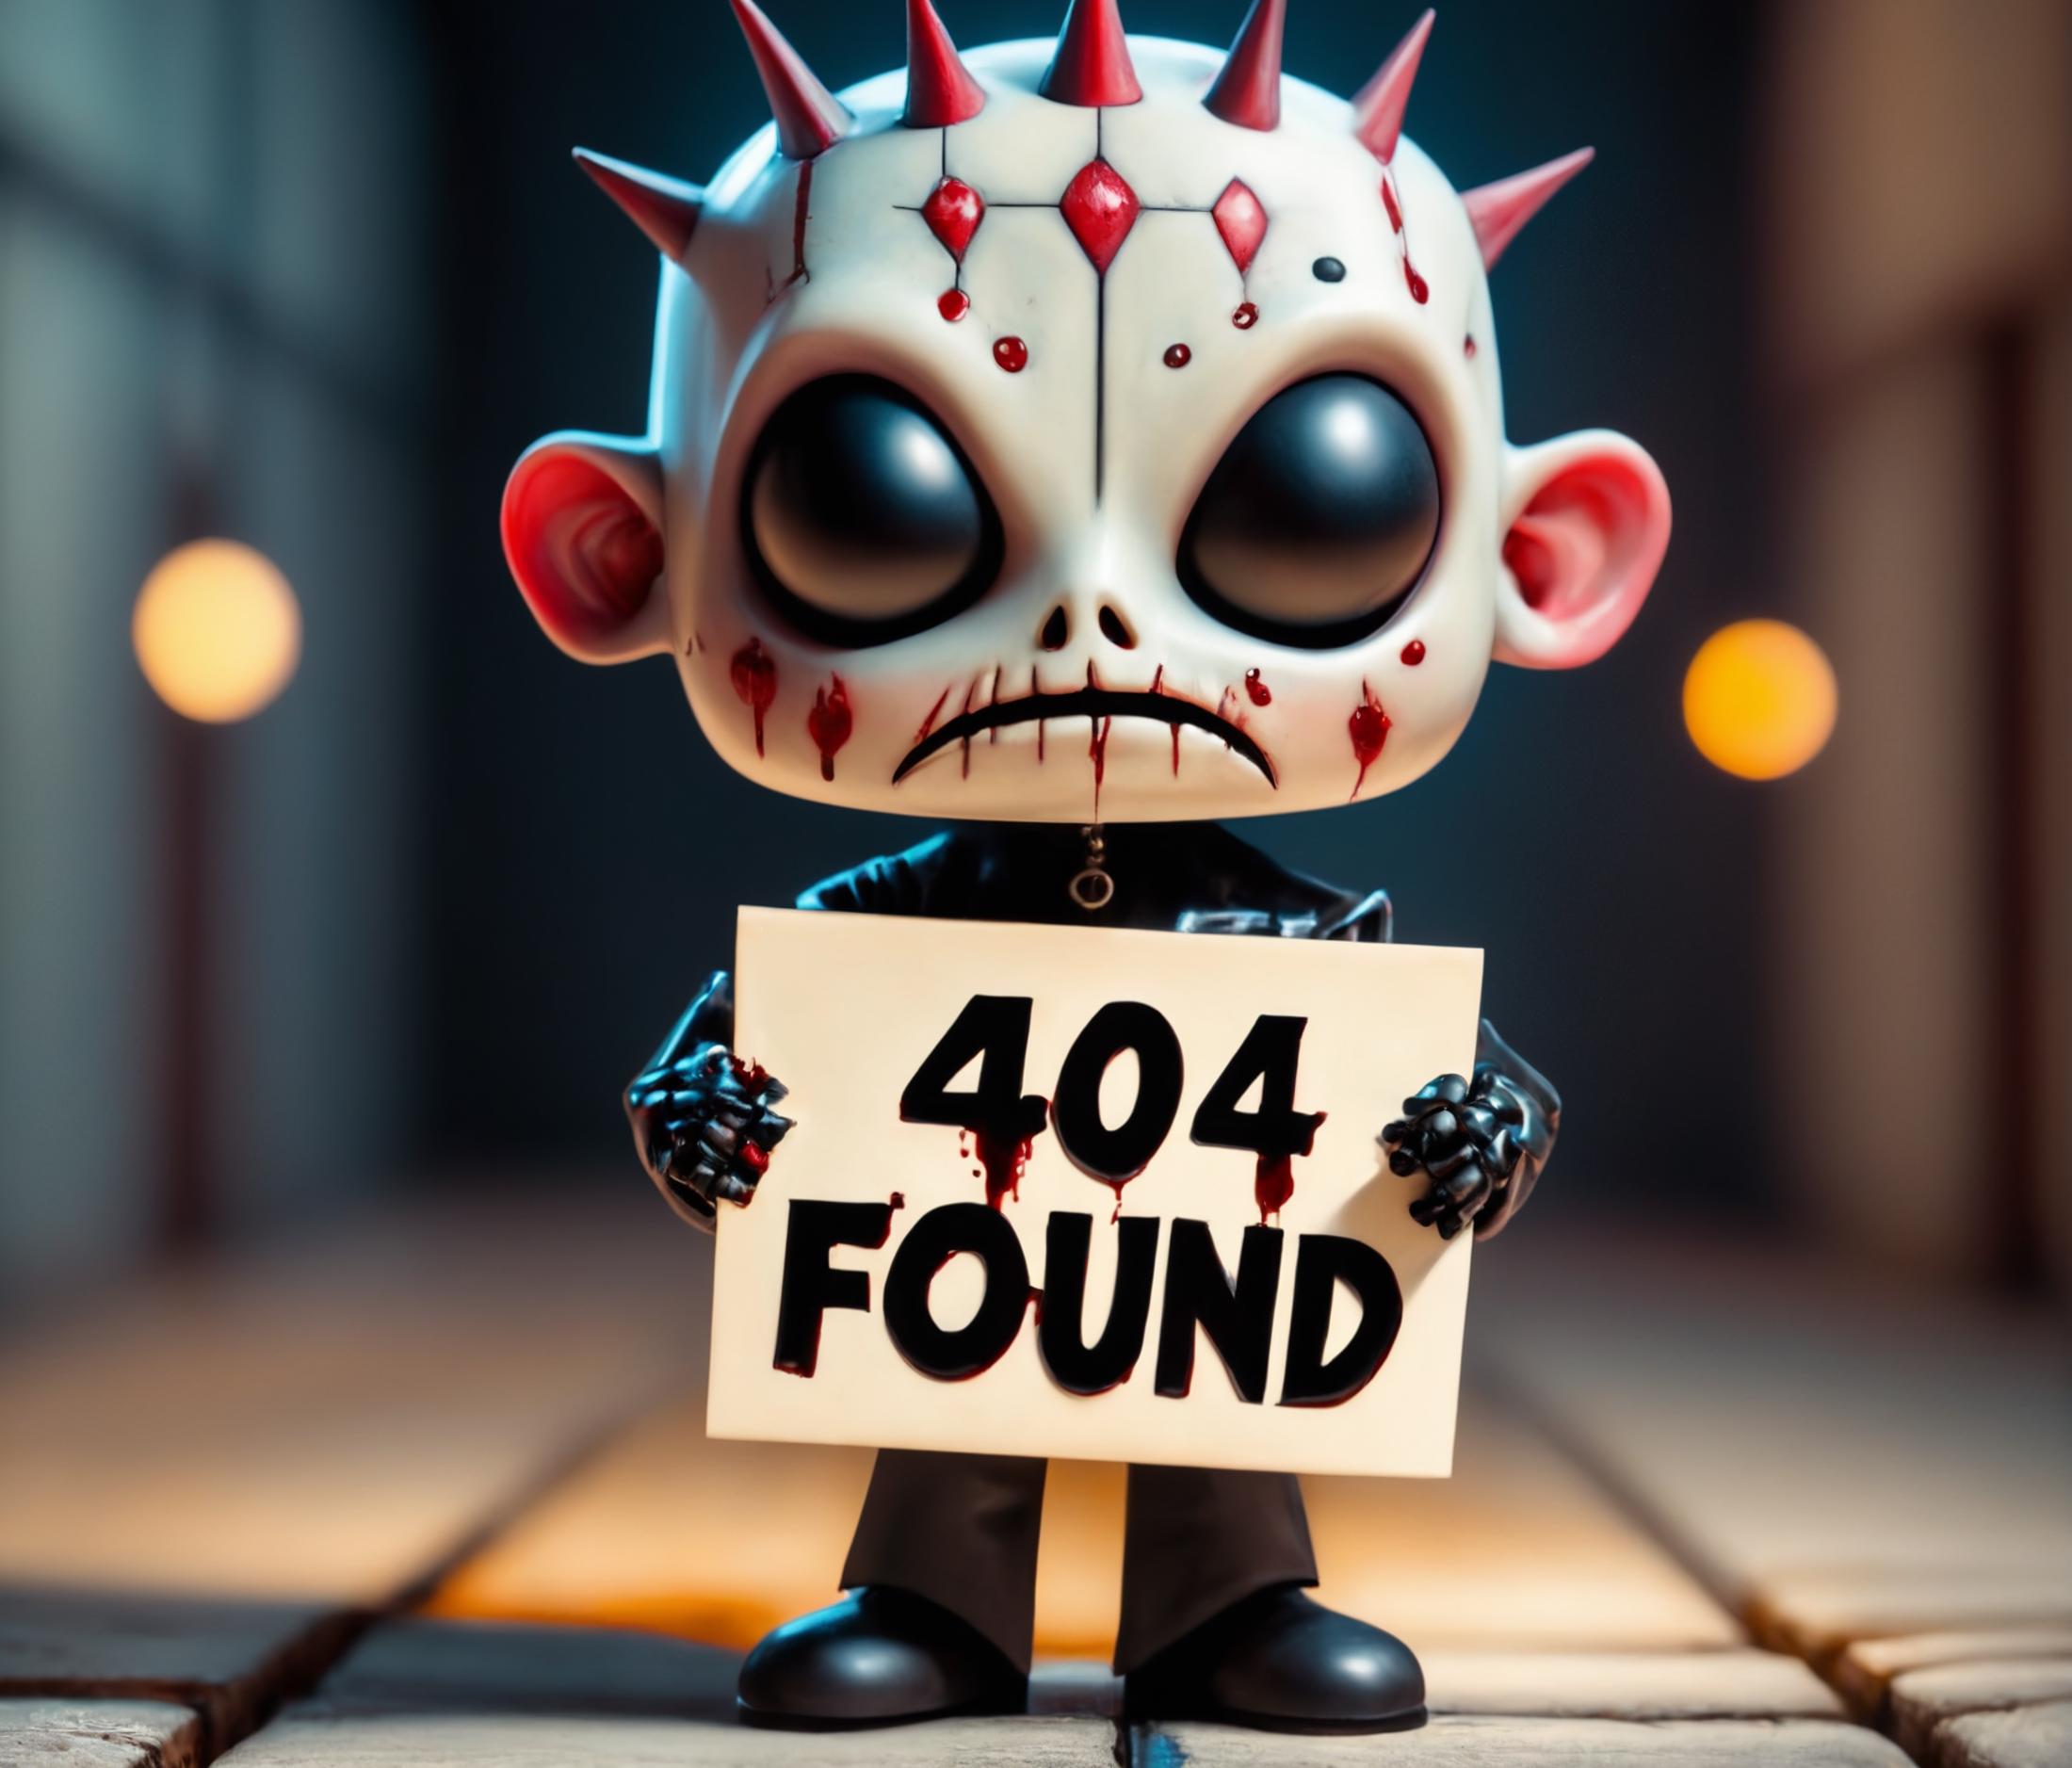 A creepy doll holding a sign that says 404 Found.